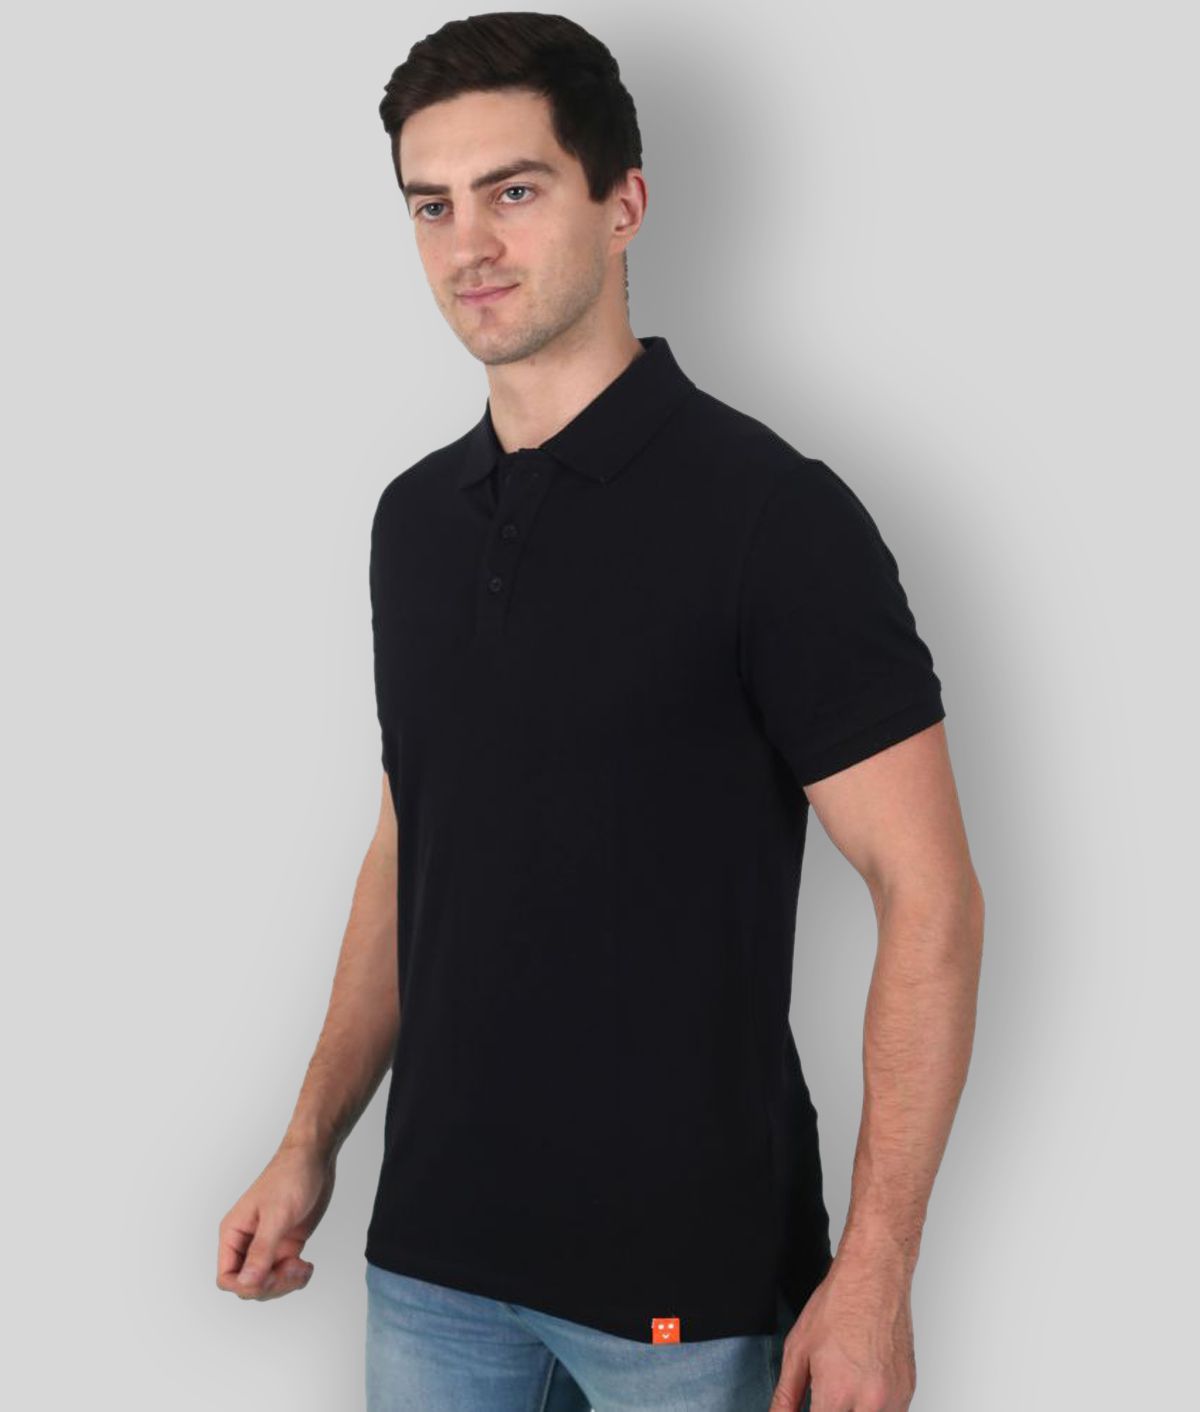 Canjuice BlackCotton Solid Polo T Shirt Single Pack - Buy Canjuice ...